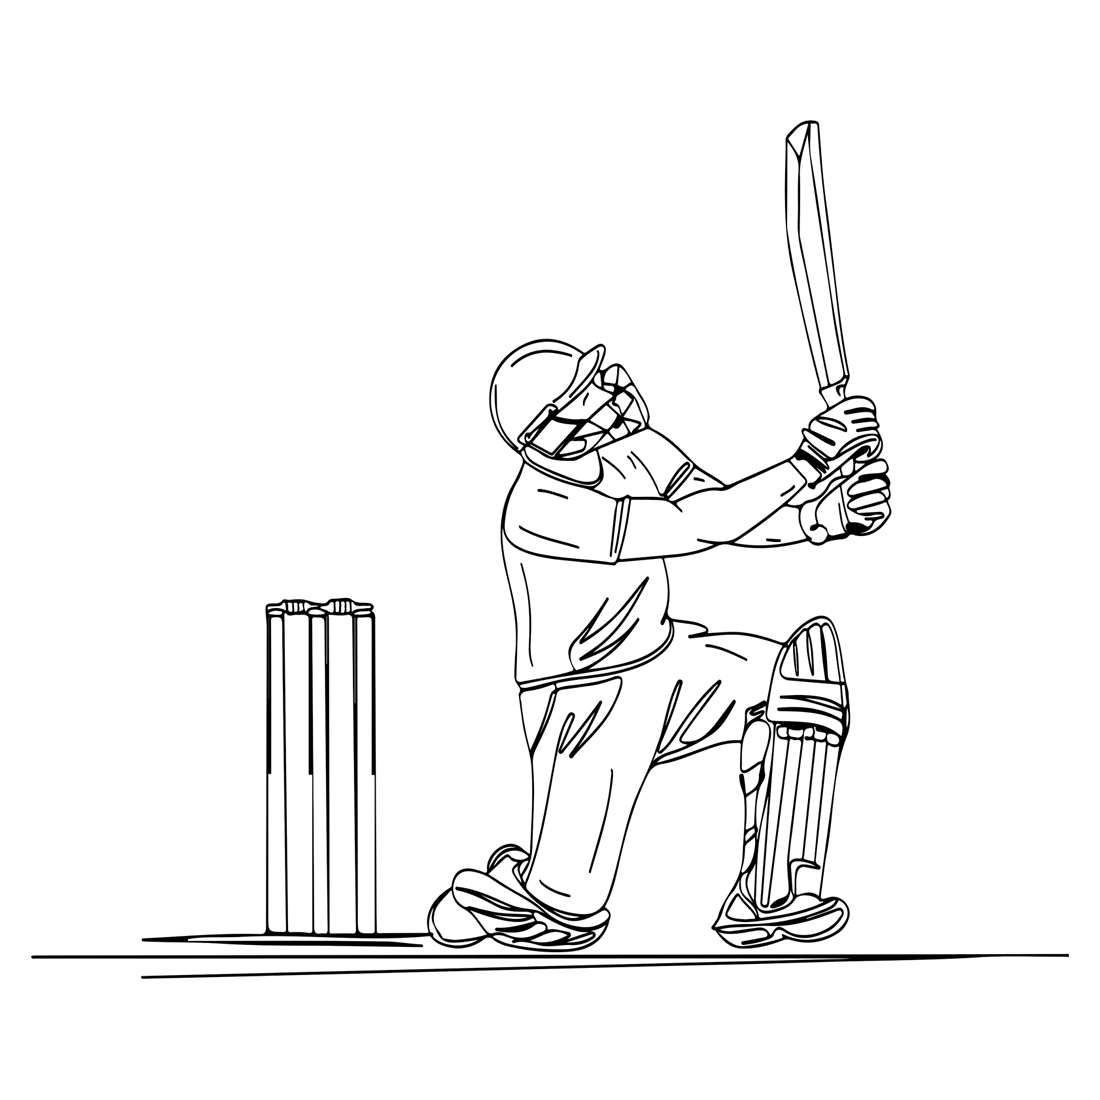 Dynamic Cricket Moves: Batsman Playing Shots in West Indies Style, Vector Art: Caribbean Cricket Batsman Hitting Ball Silhouette, Caribbean Cricket Elegance: Batsman Hitting Ball Vector preview image.